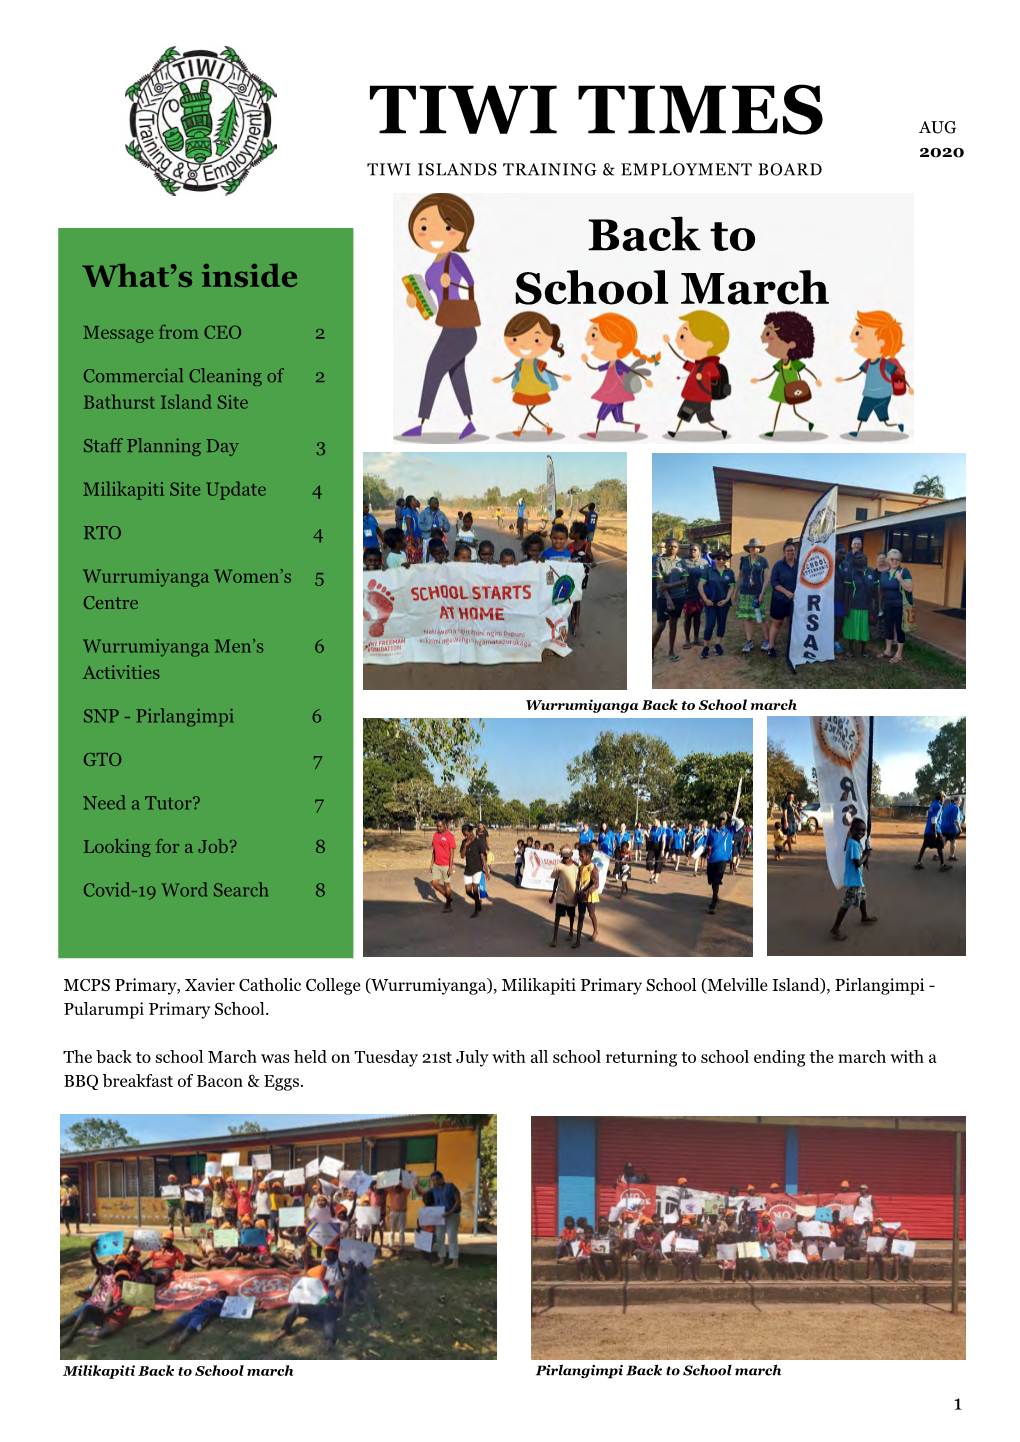 TIWI TIMES AUG 2020 TIWI ISLANDS TRAINING & EMPLOYMENT BOARD Back to What’S Inside School March Message from CEO 2